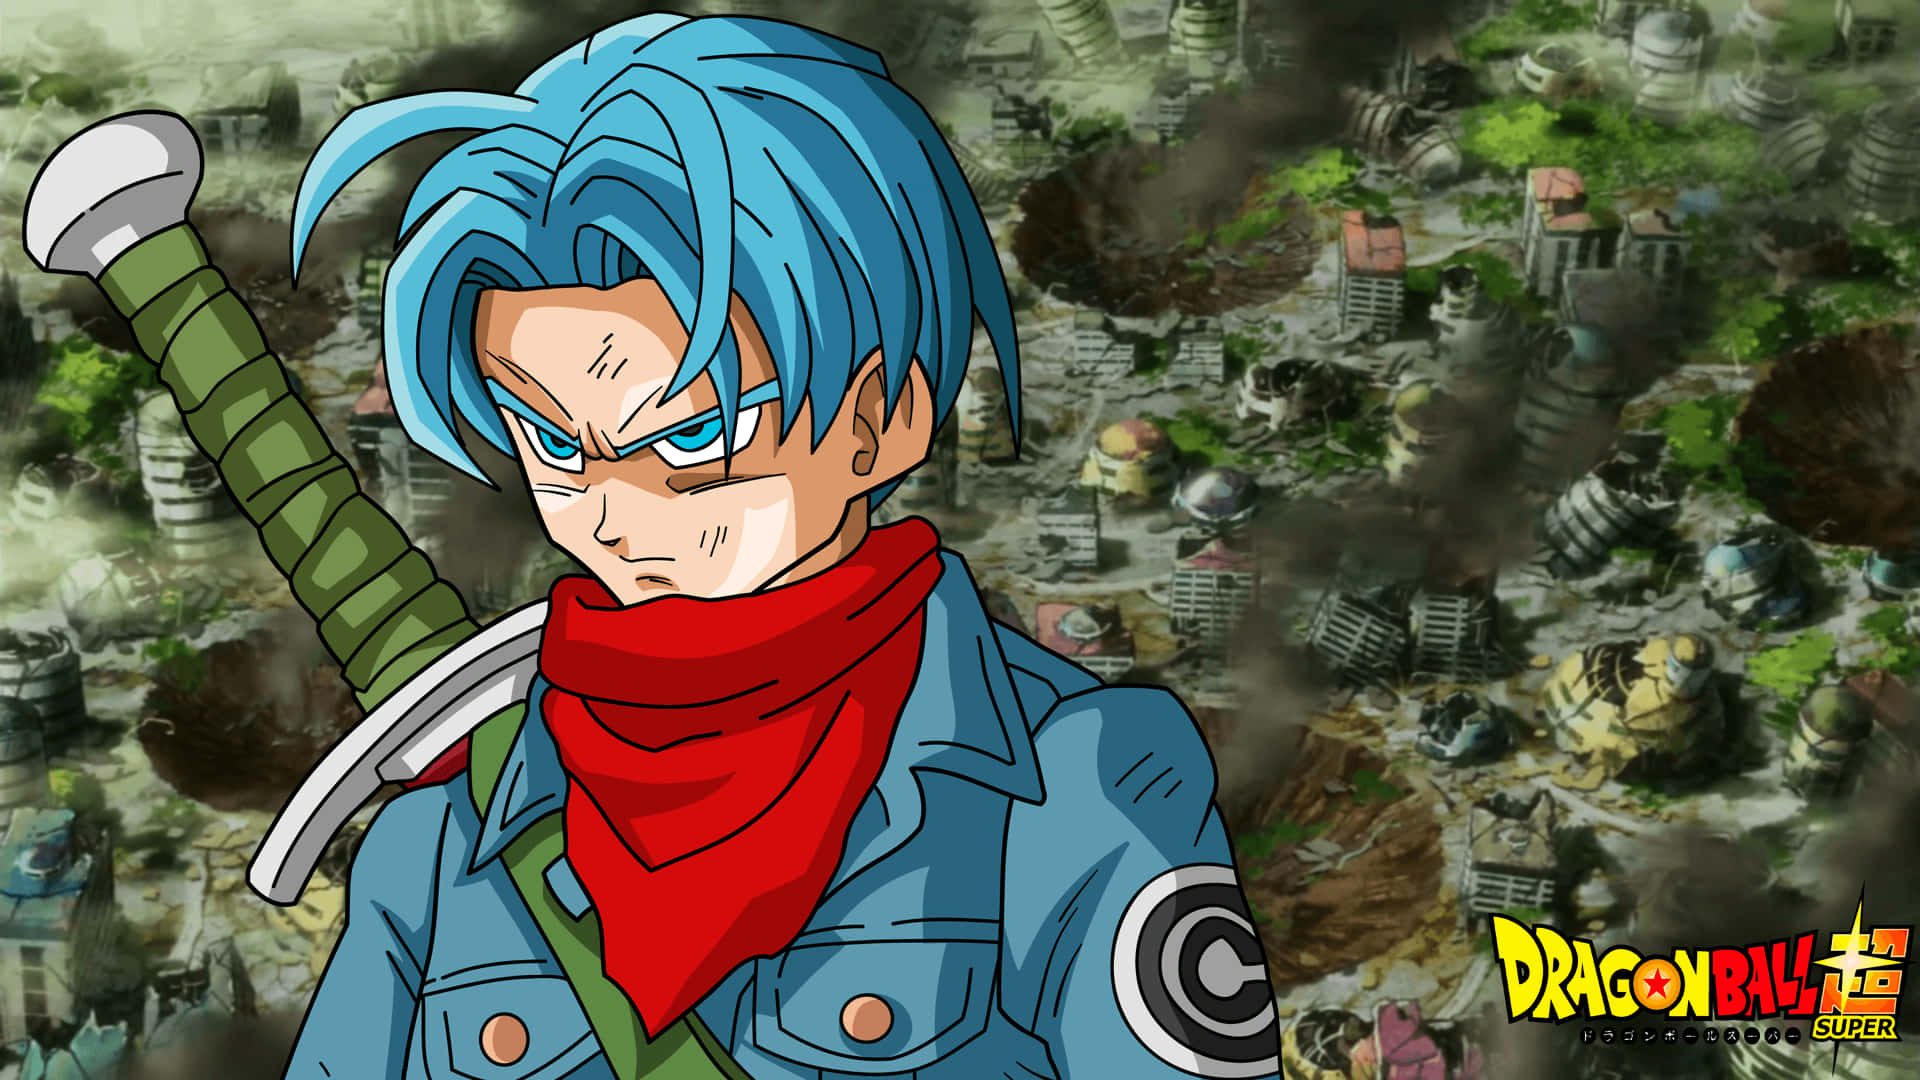 "Discover the world of Dragon Ball Z with Trunks" Wallpaper